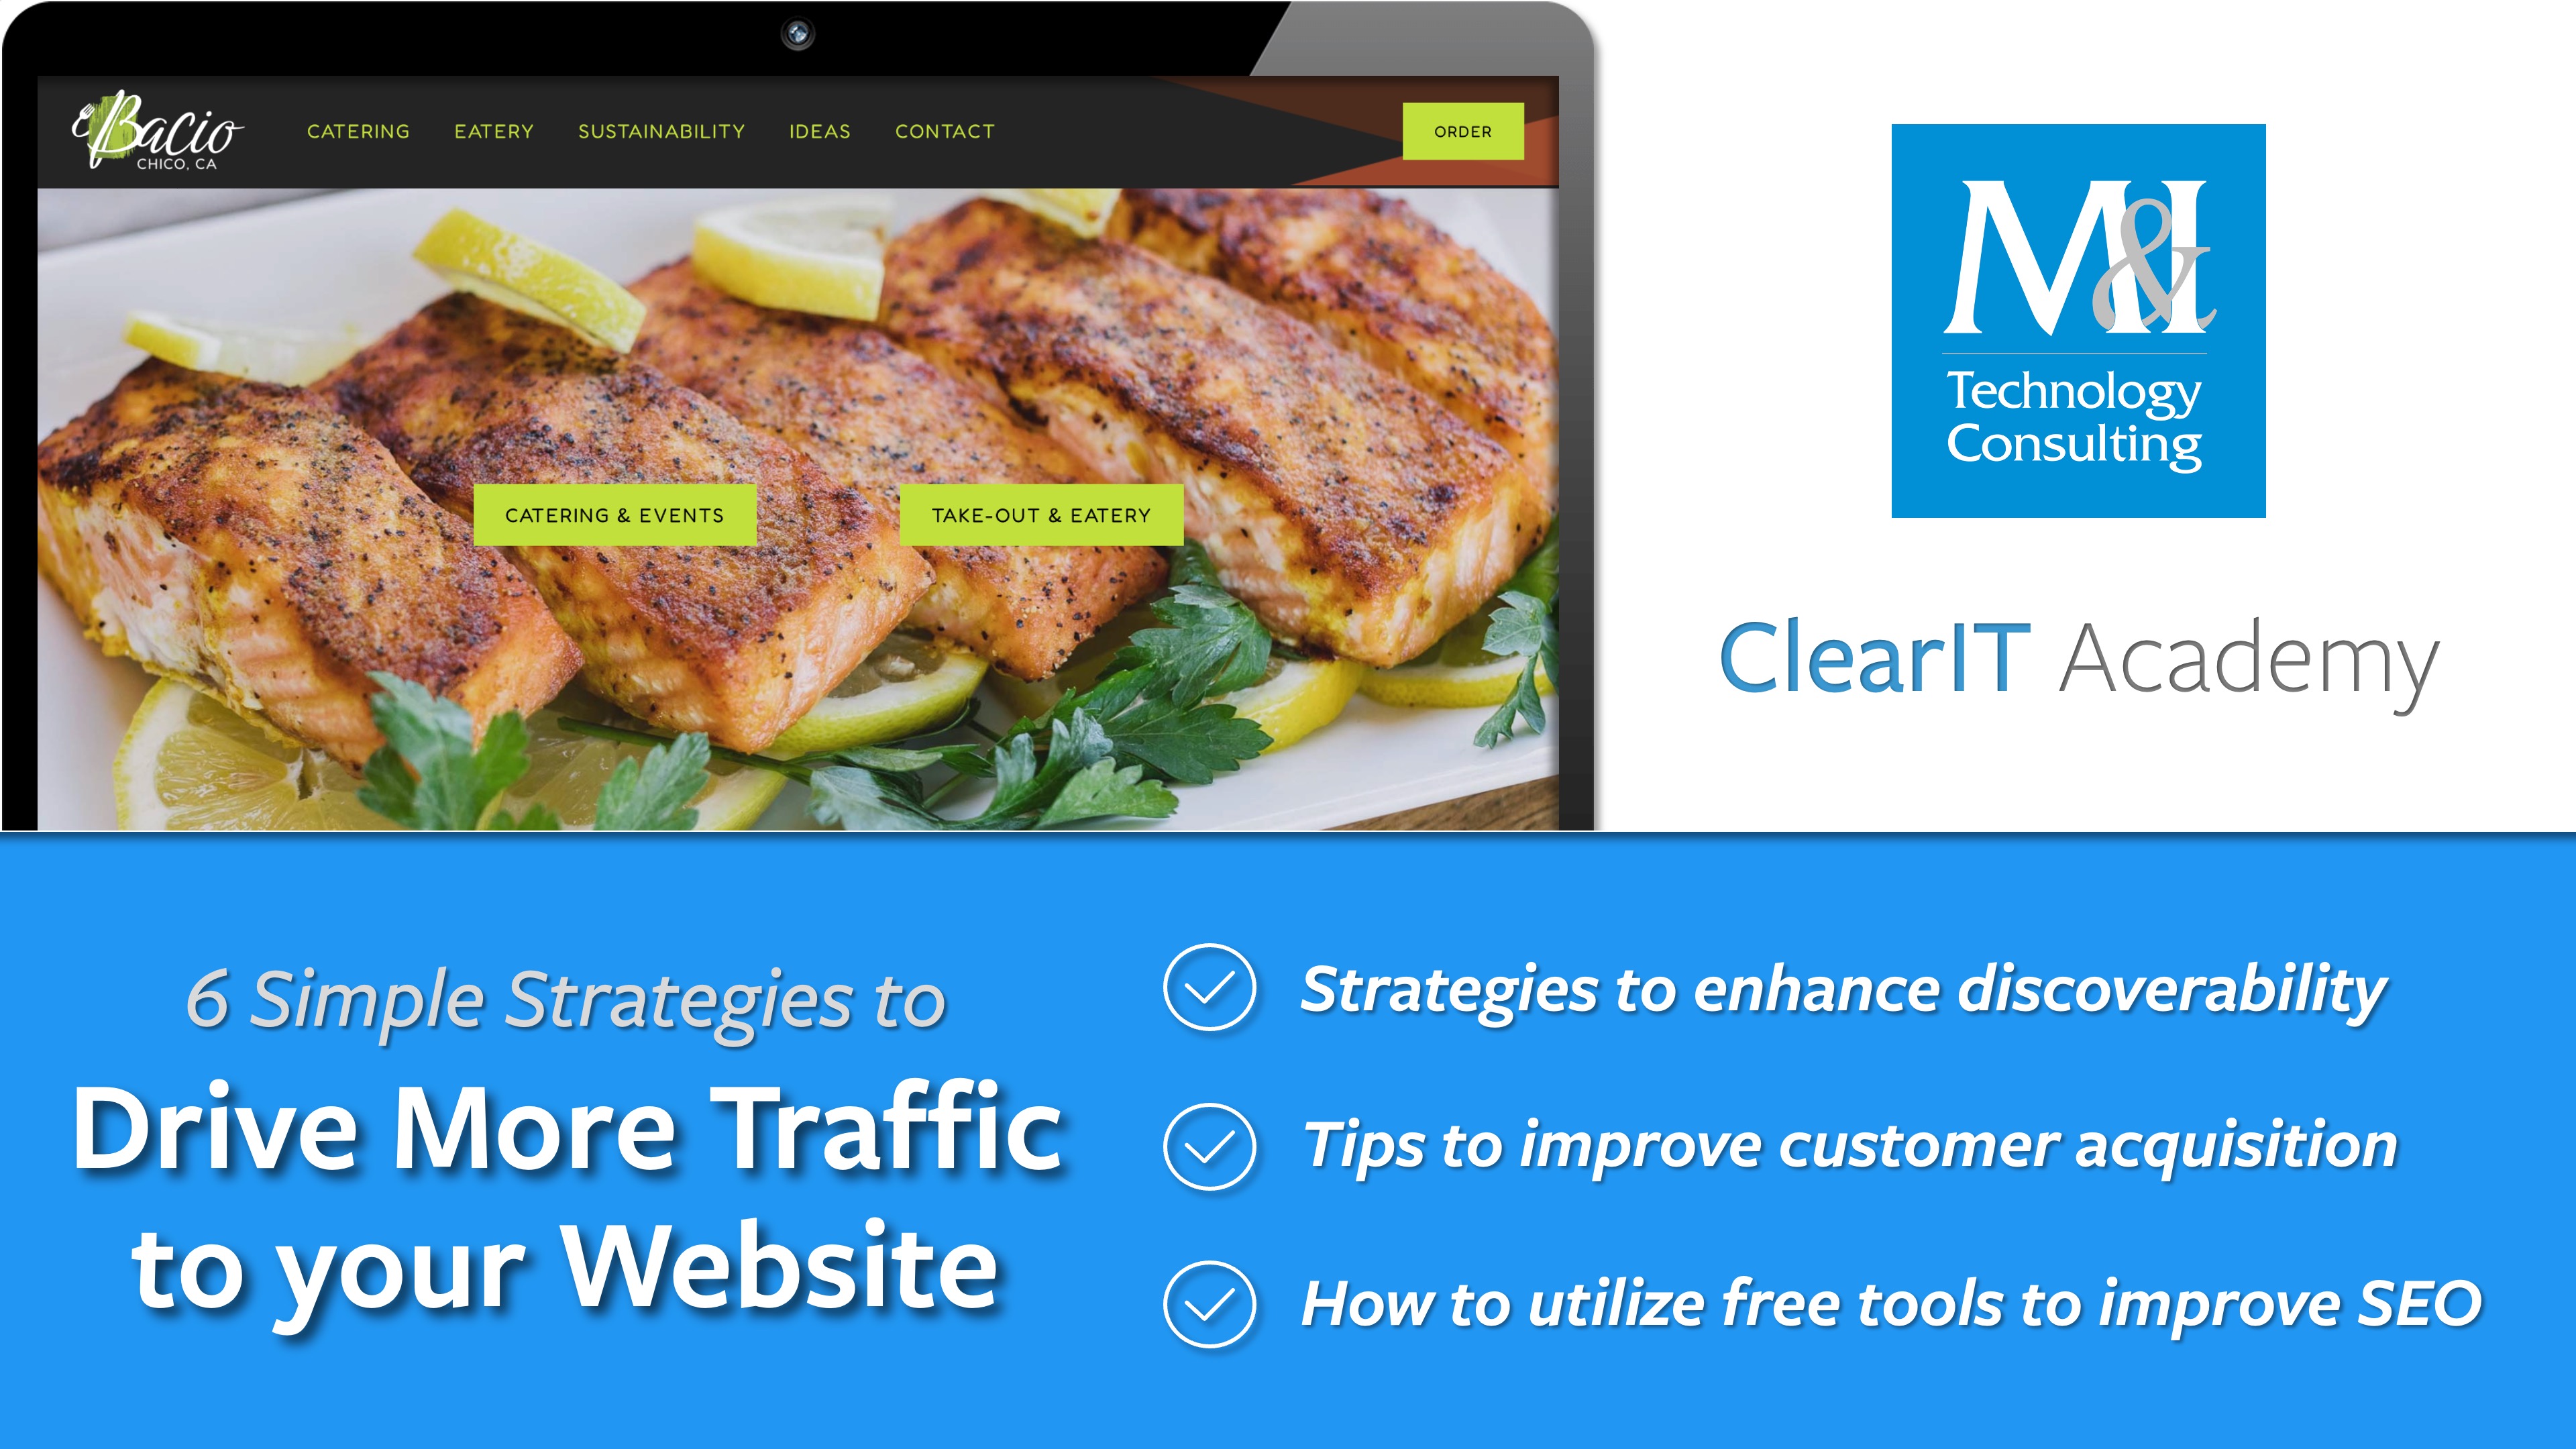 clearit-academy-6-simple-strategies-to-drive-more-traffice-to-your-website (1)